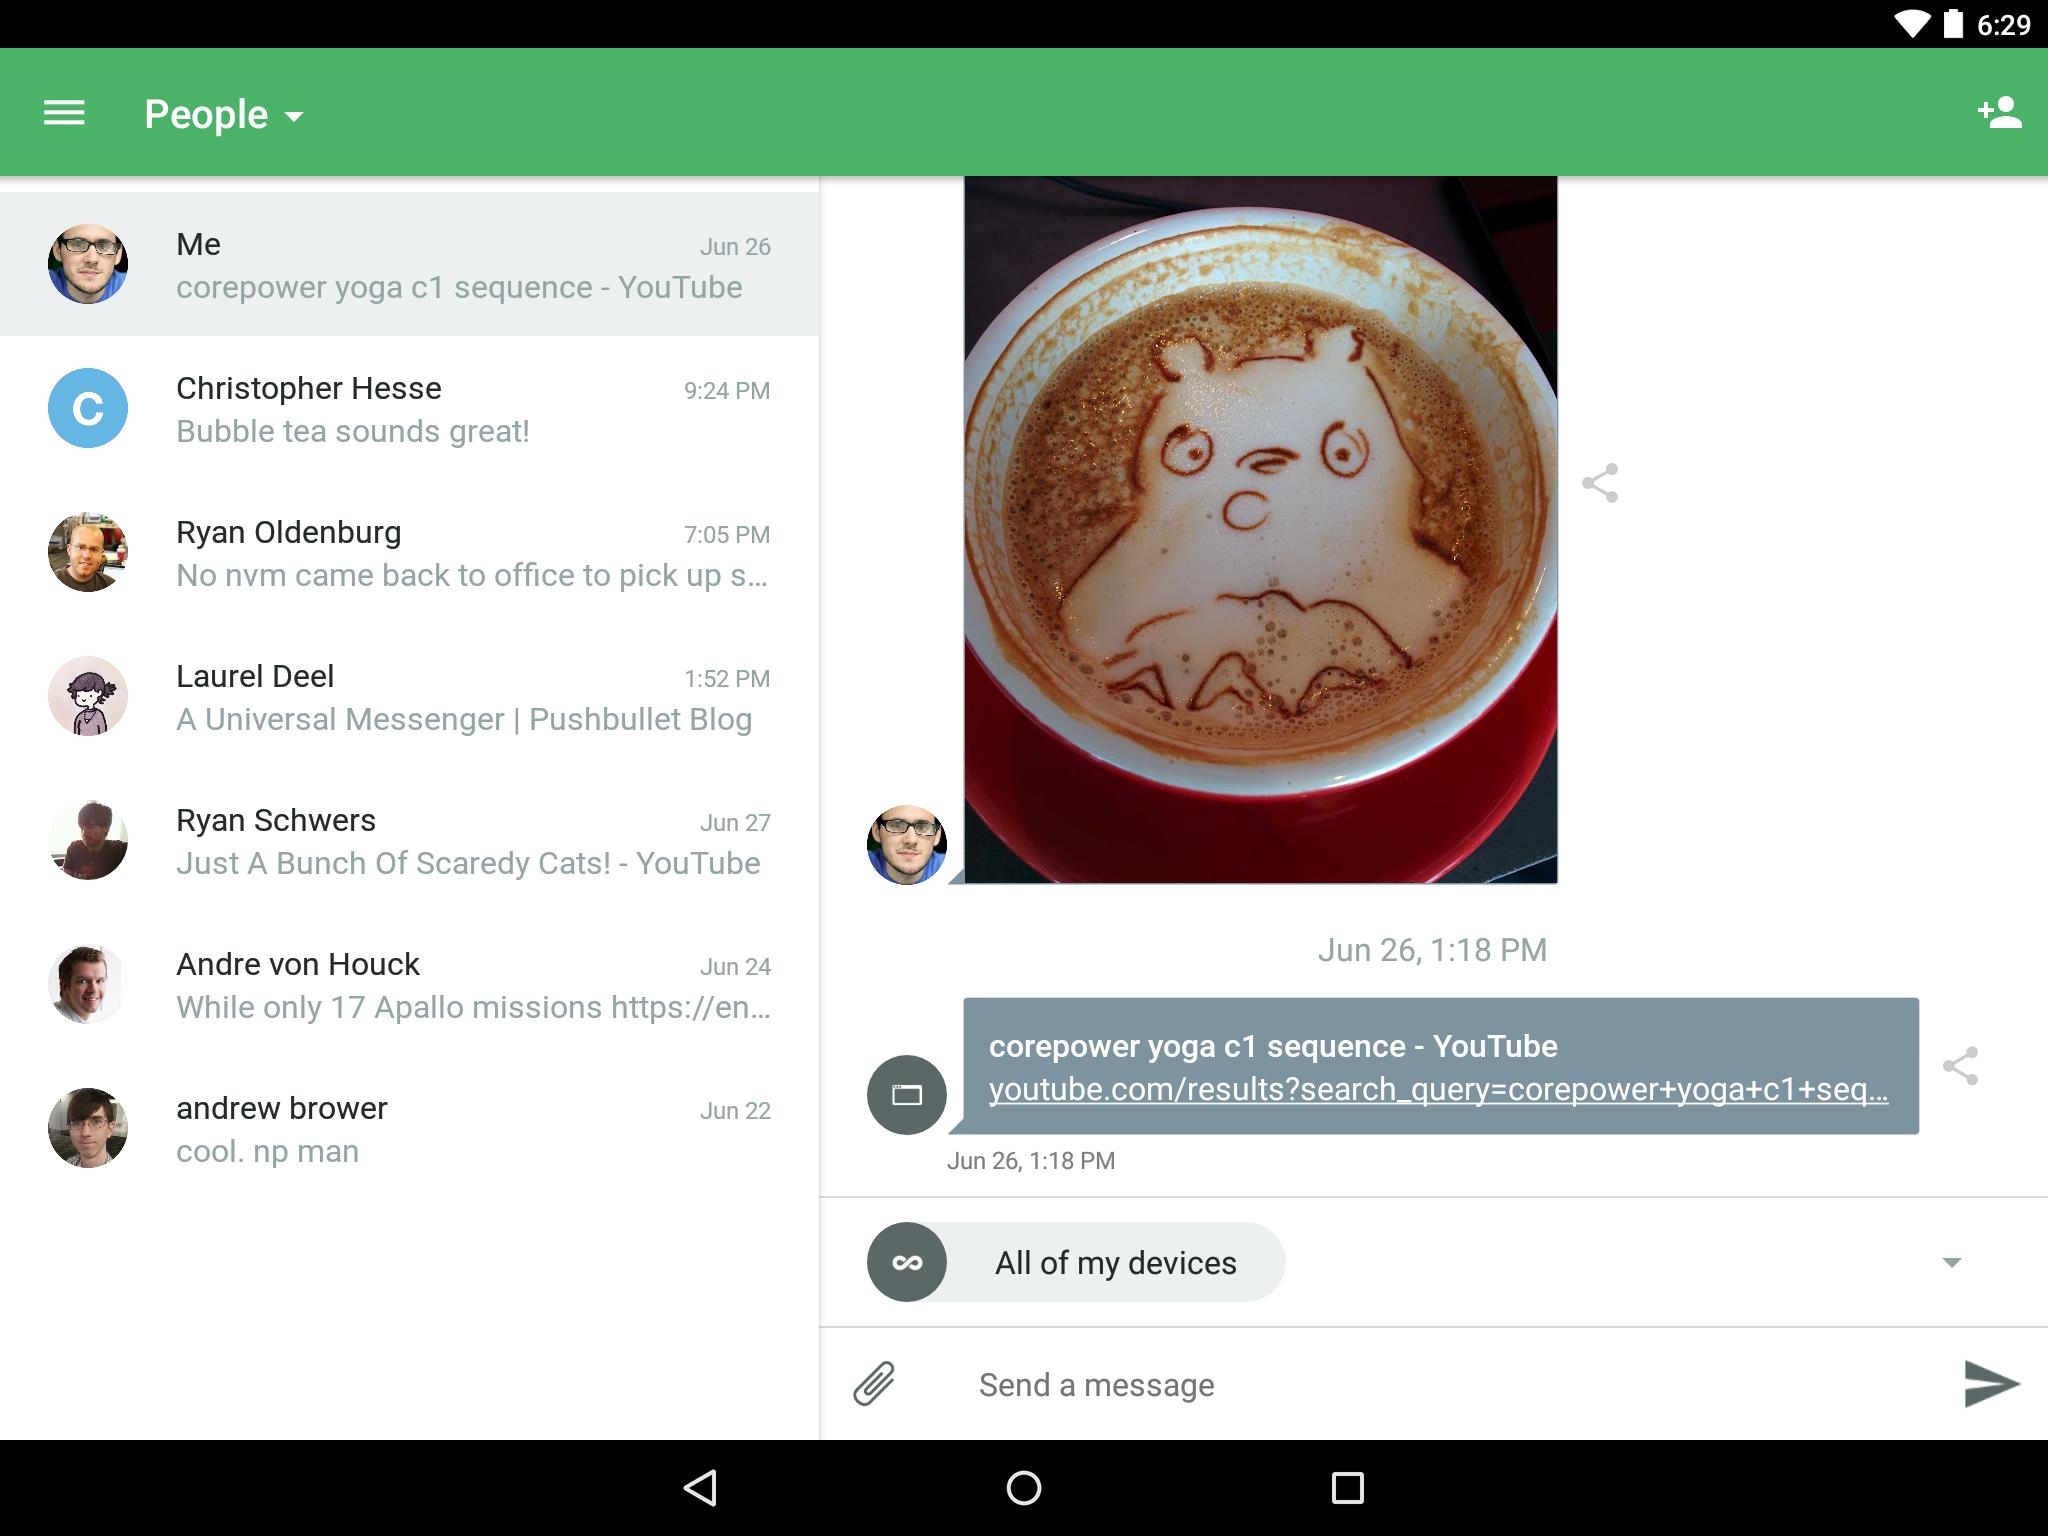 Pushbullet - SMS on PC and more